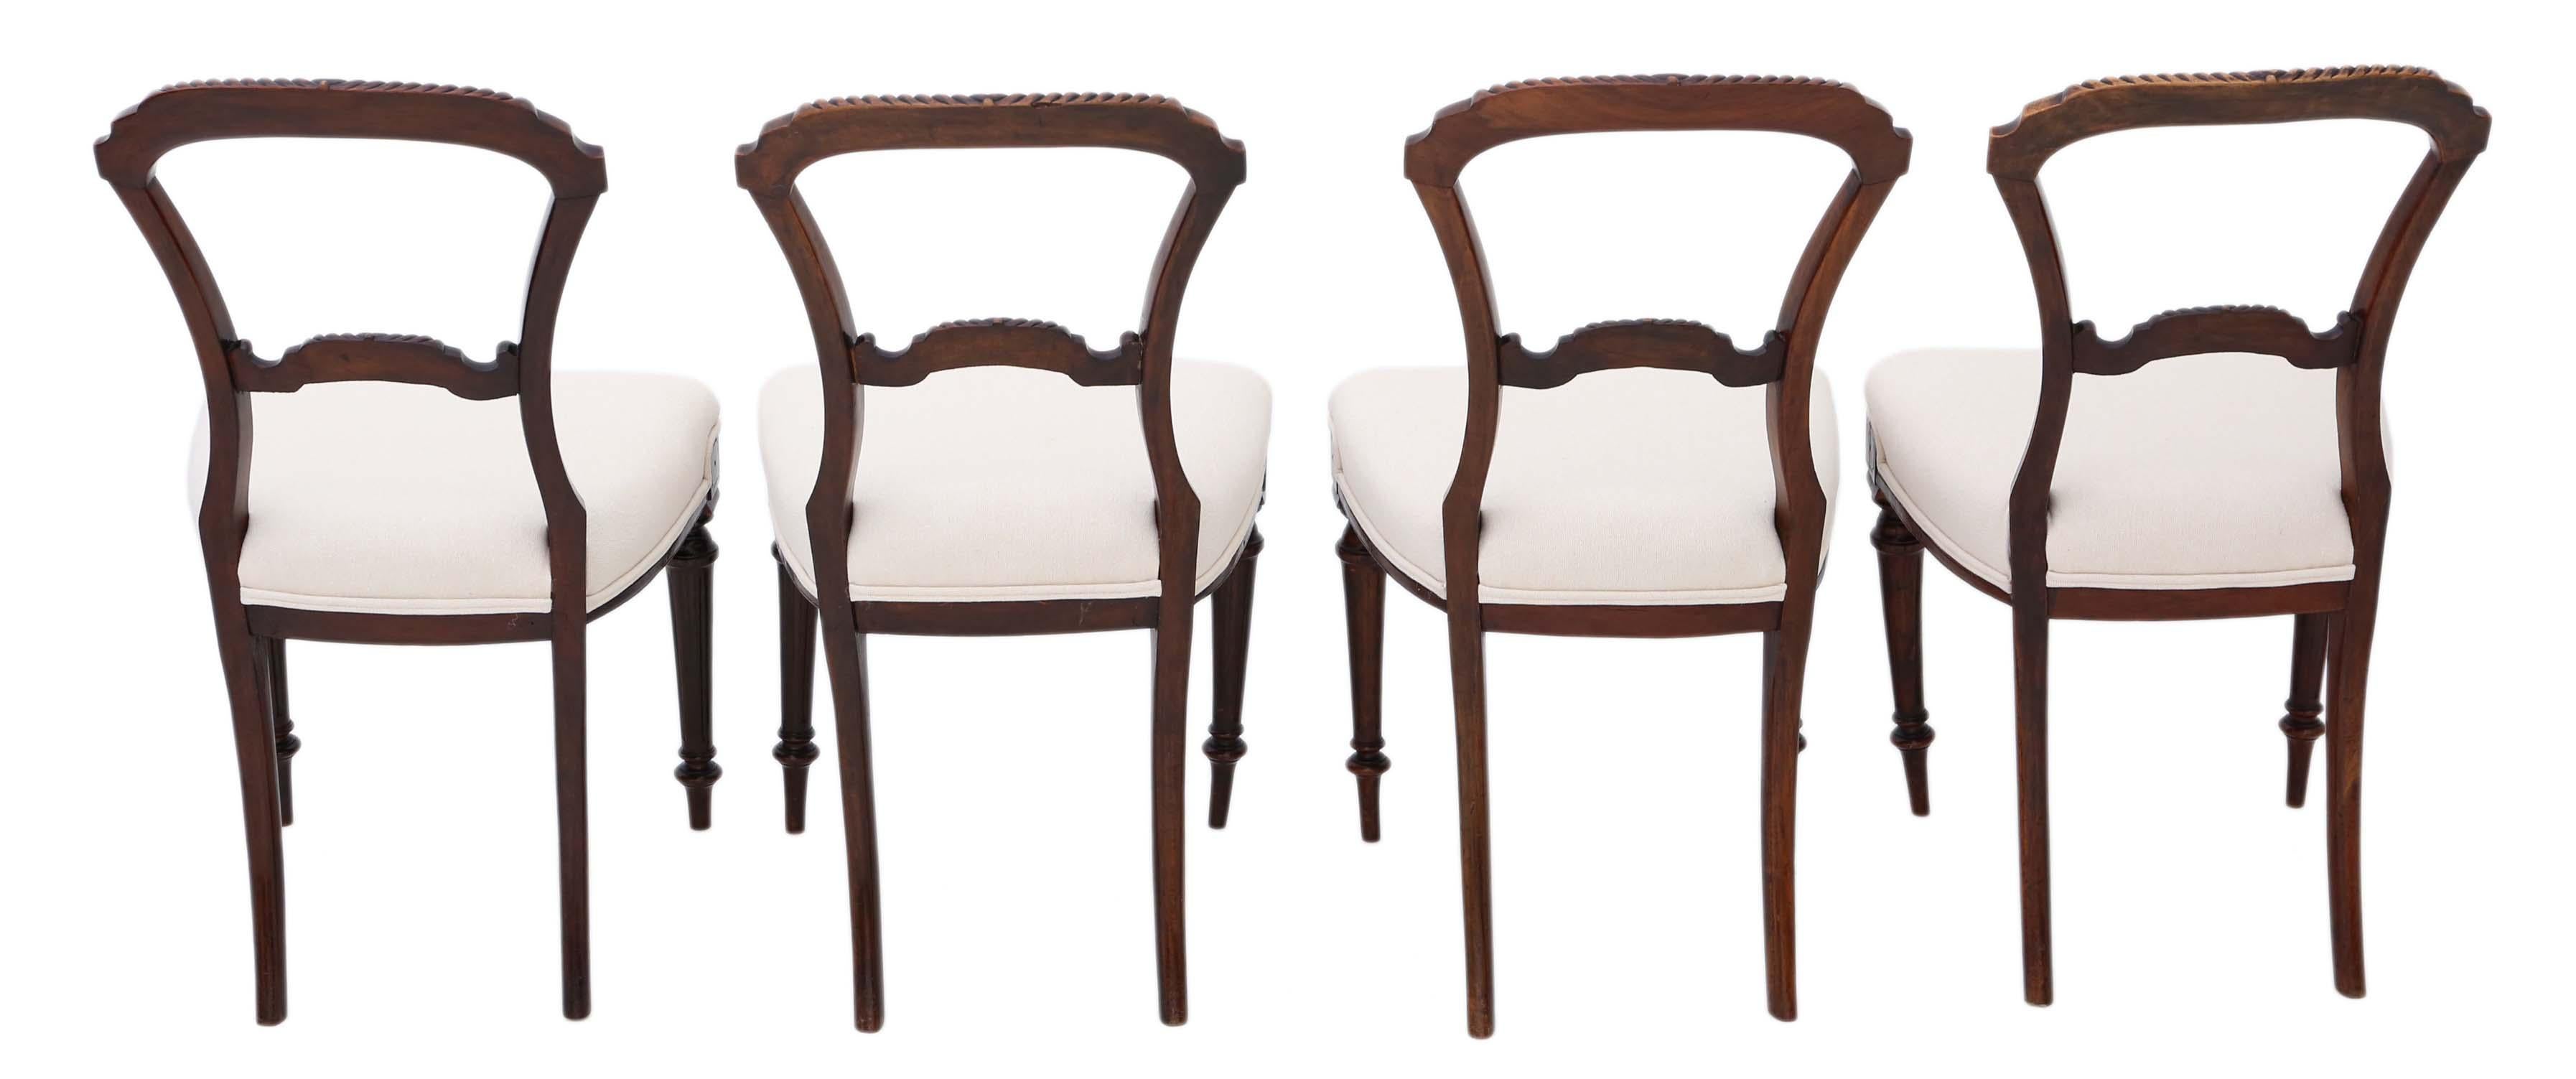 Antique set of 4 Victorian circa 1880 walnut balloon back dining chairs.
No loose joints.
New upholstery in a heavyweight fabric.
Would look great in the right location!
Overall maximum dimensions: 46cm W x 50cm D x 87cm H (44cm high seat when